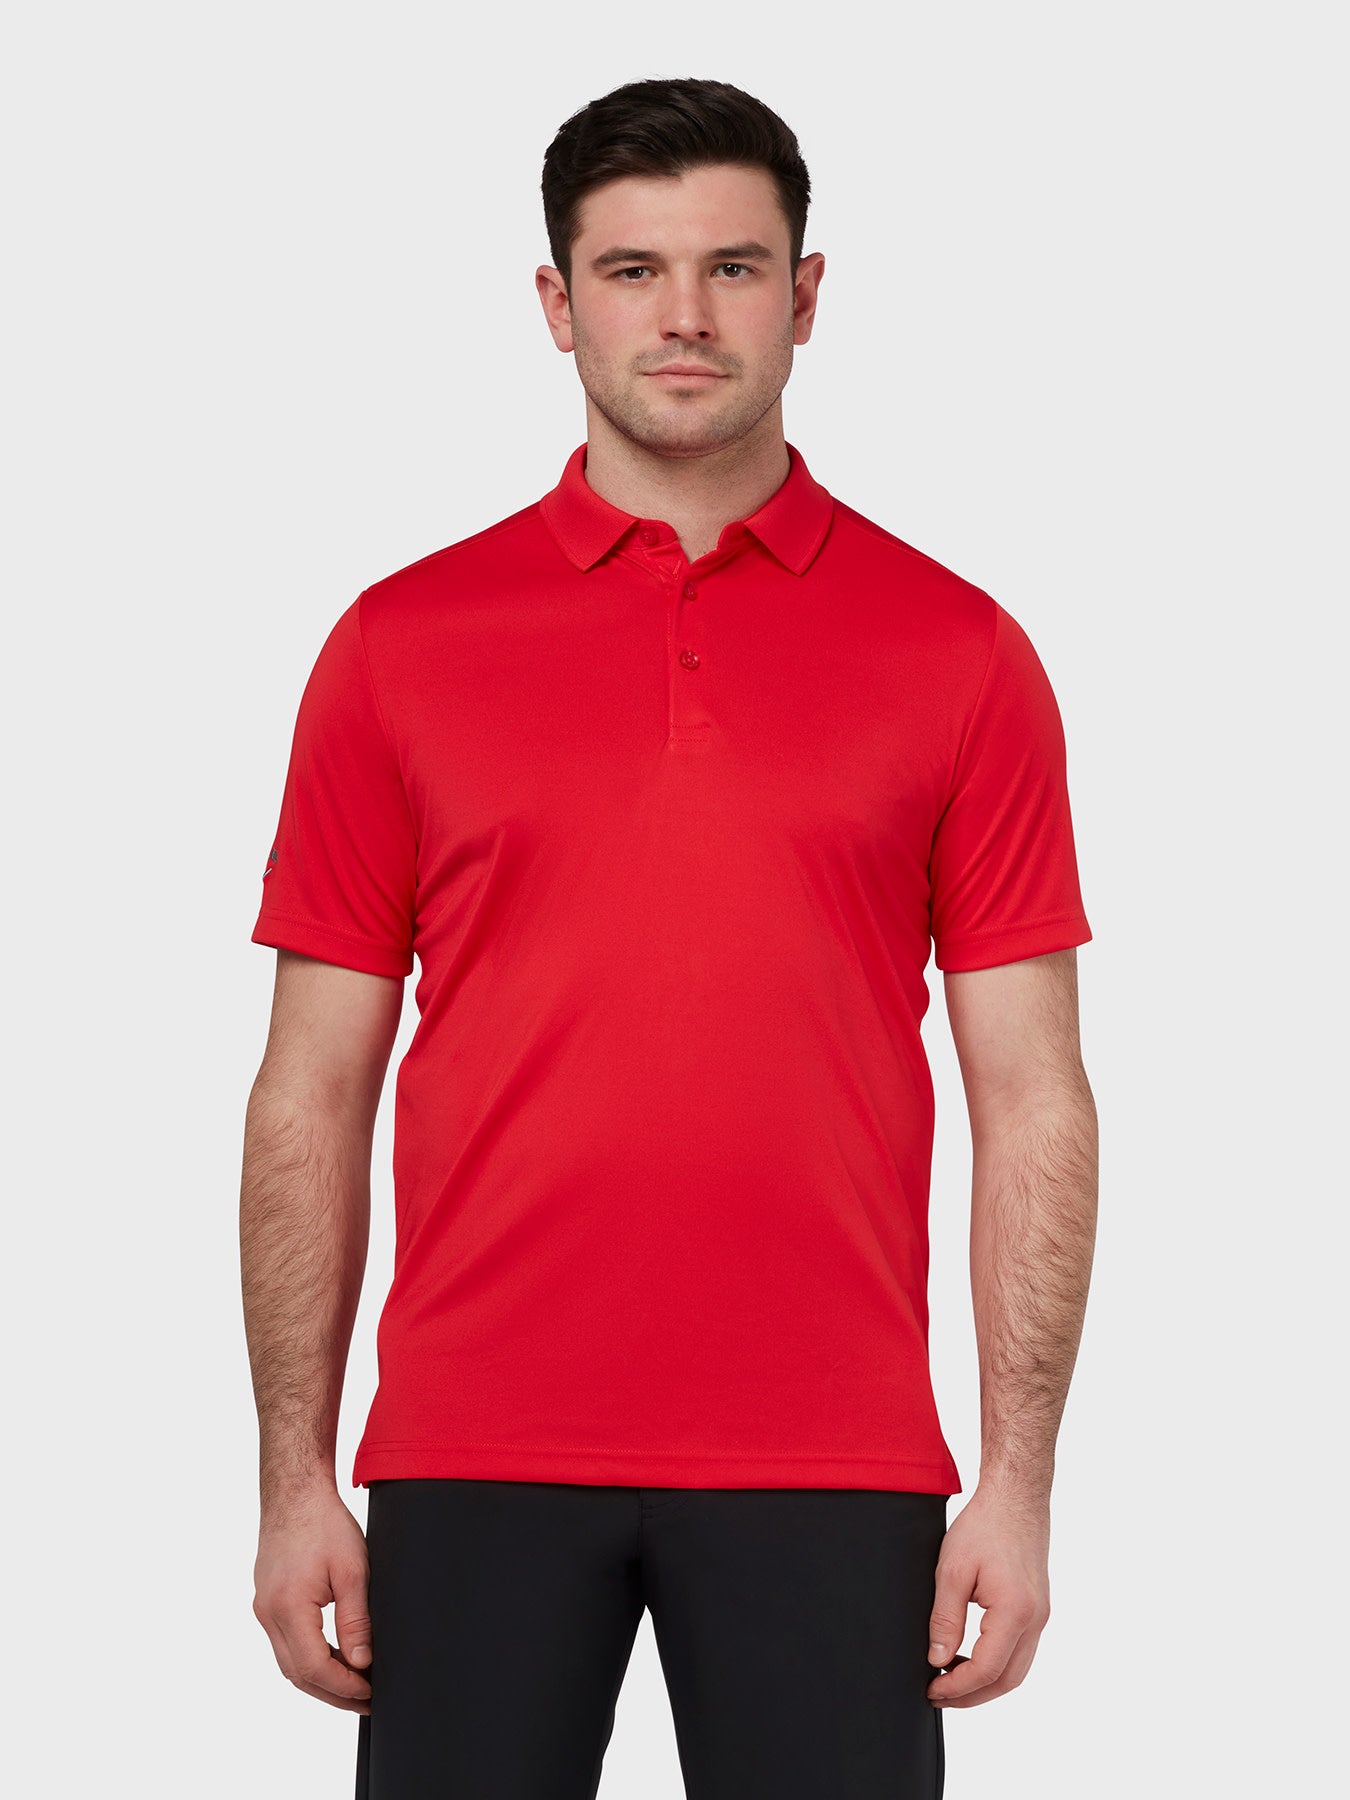 View Tournament Polo In True Red True Red M information